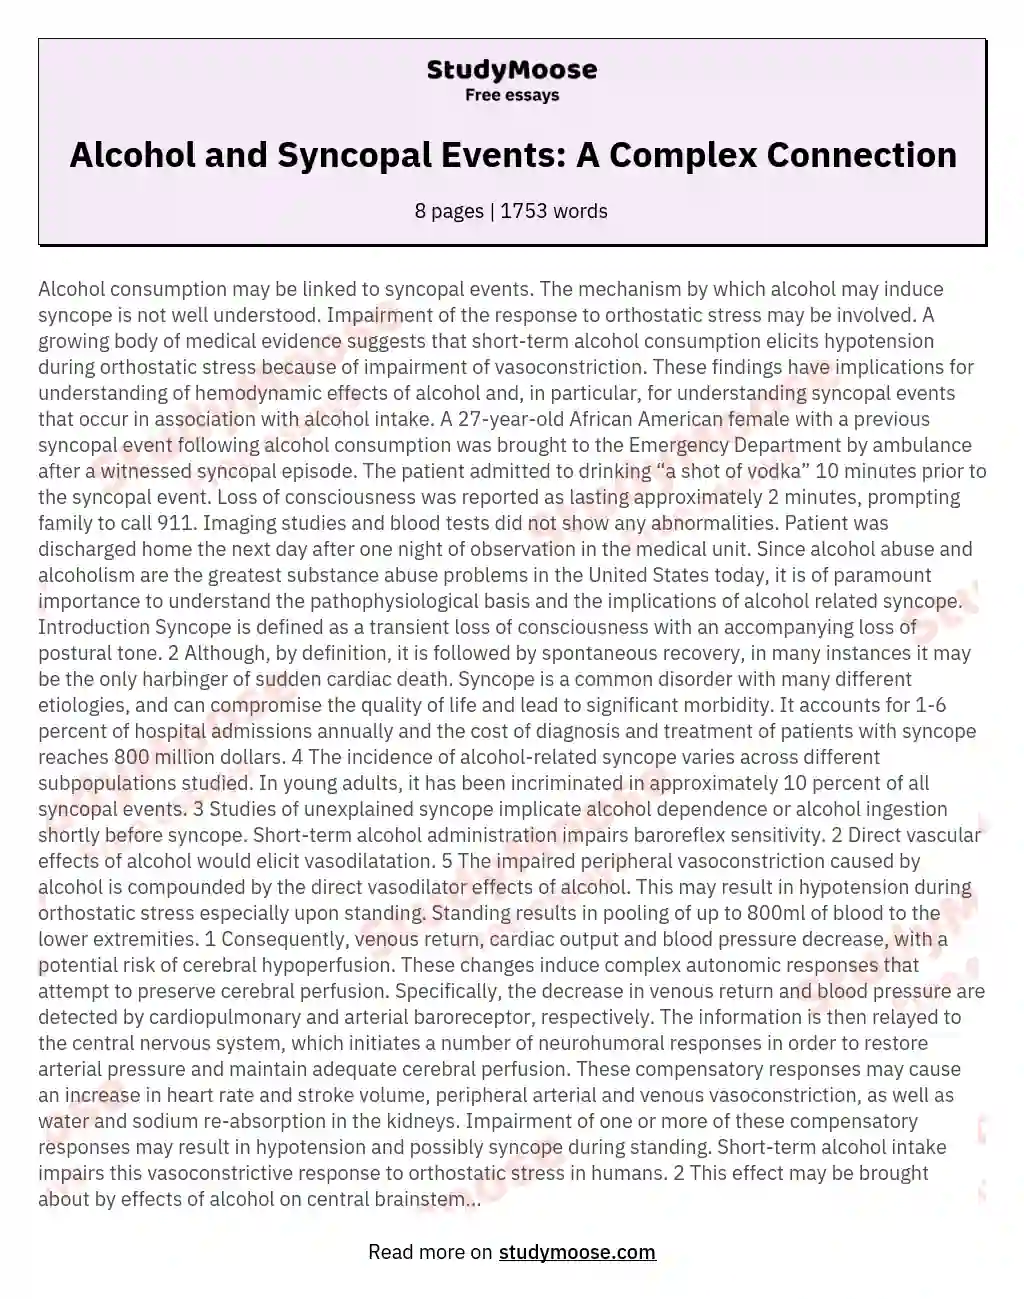 Alcohol and Syncopal Events: A Complex Connection essay